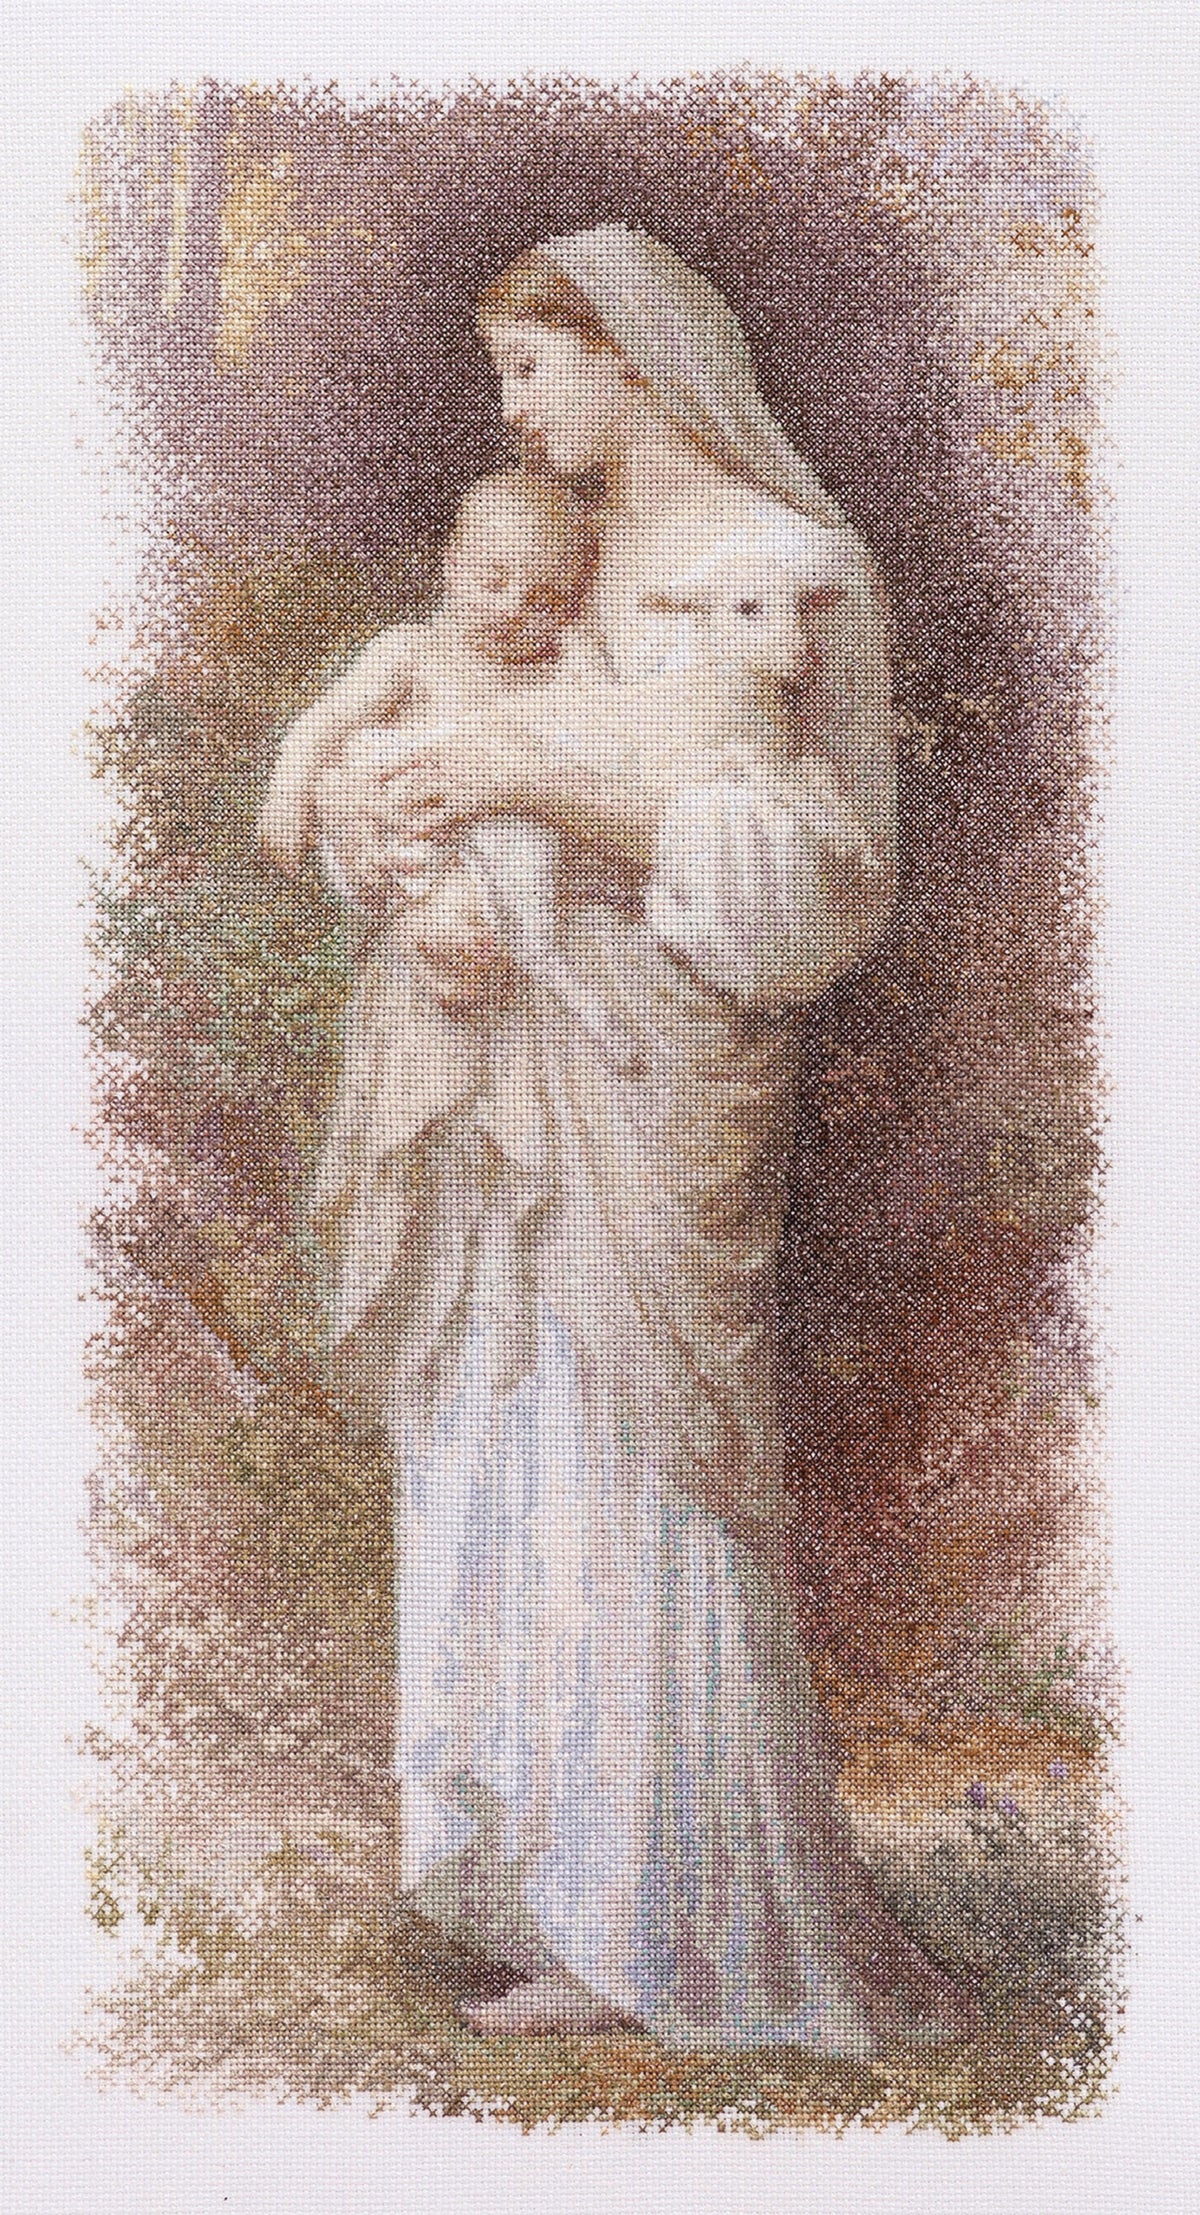 Thea Gouverneur - Counted Cross Stitch Kit - The Blessed Virgin Mary - Aida - 16 count - 560A - Thea Gouverneur Since 1959